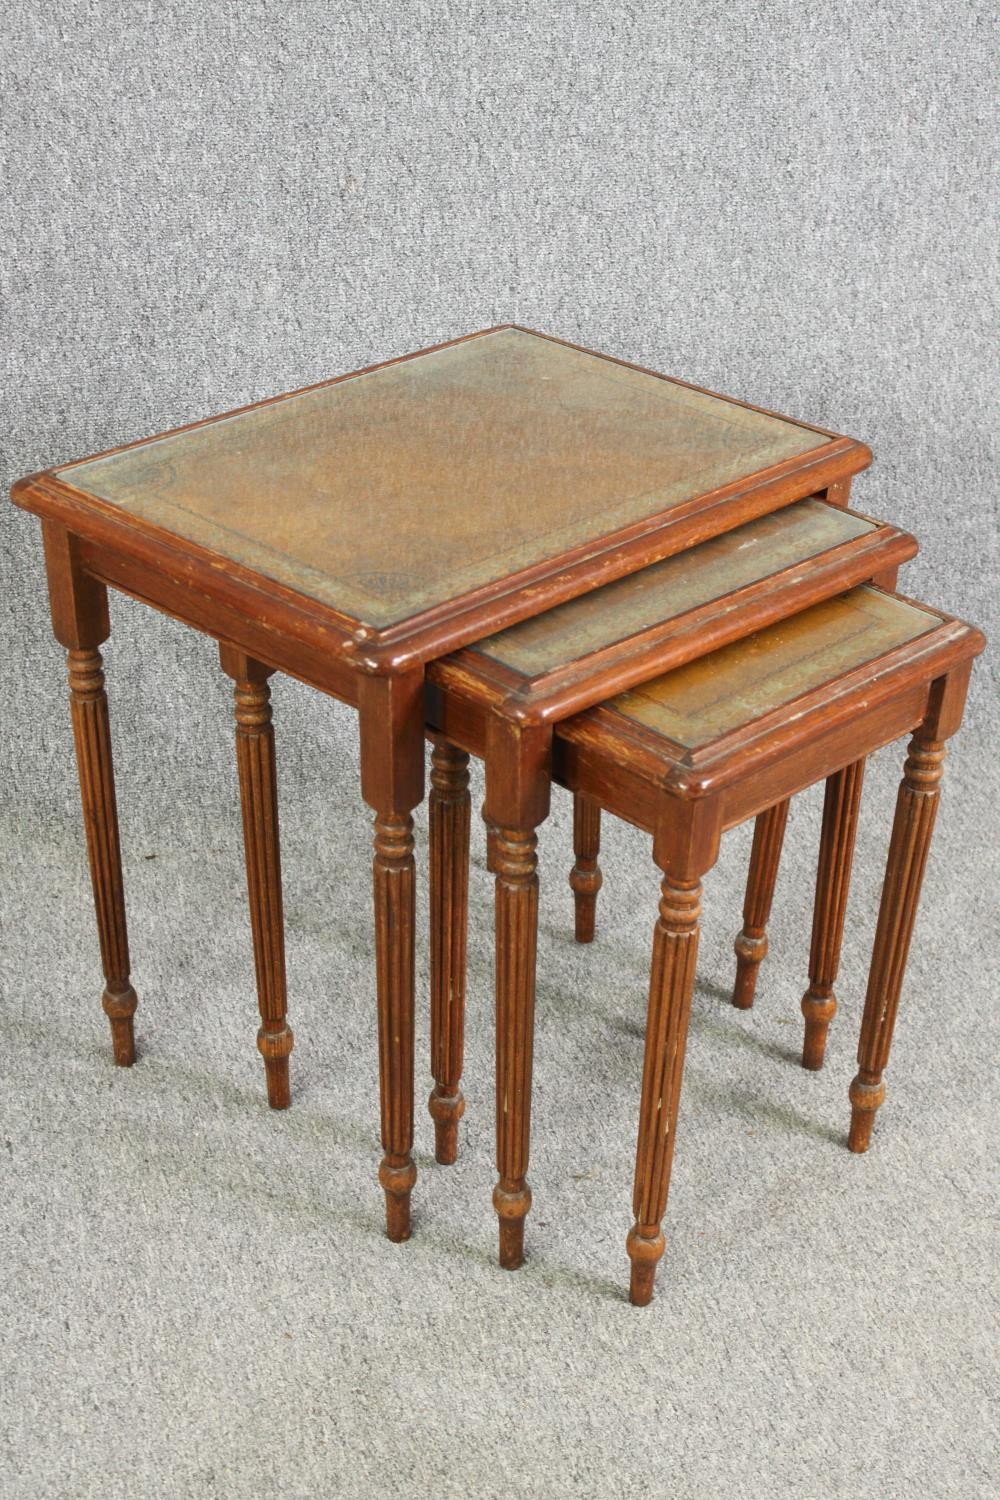 A nest of three mahogany tables with leather and glass inset tops H.58 W.53 D.40cm. (largest). - Image 2 of 6